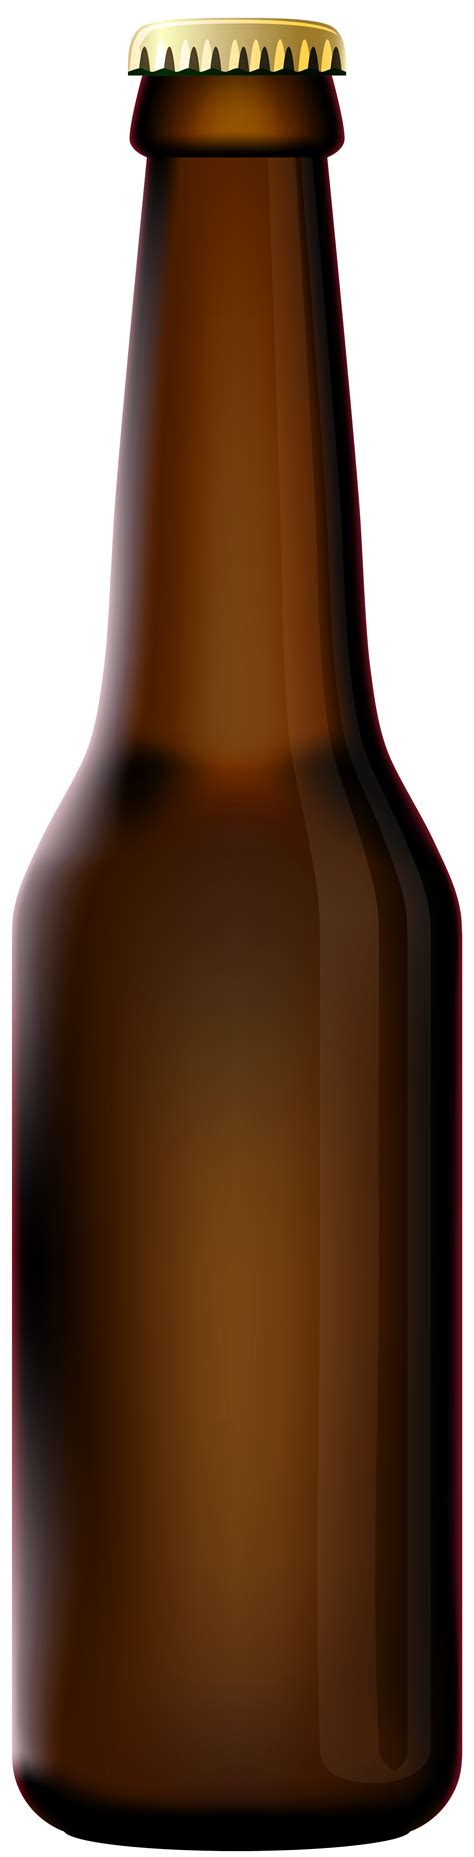 16 700 Beer Bottle Illustrations Royalty Free Vector Graphics Clip Art Library